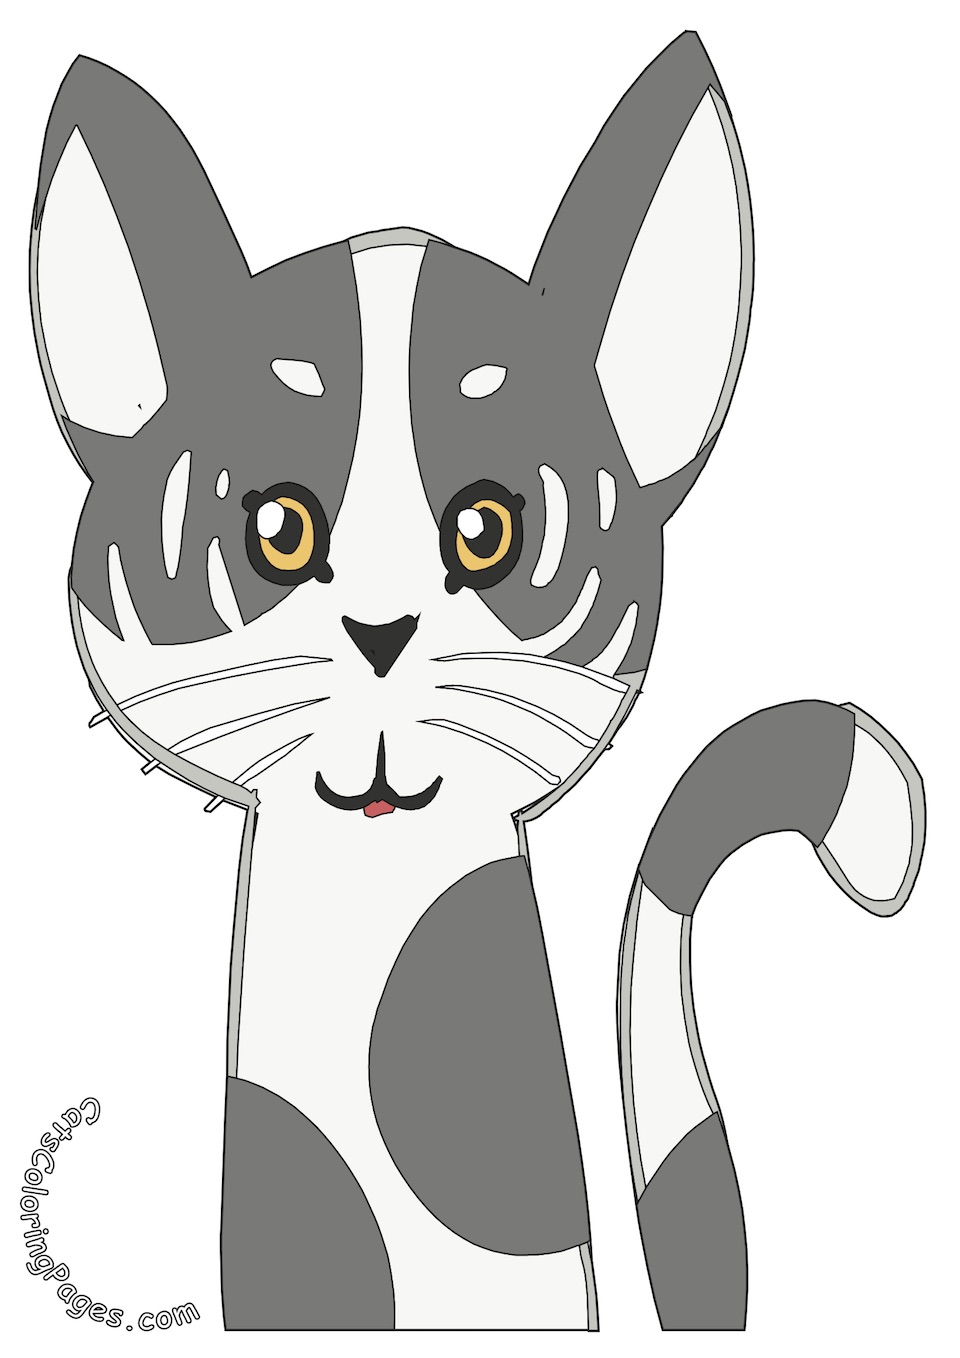 Spotted Kitten Colored Coloring Page